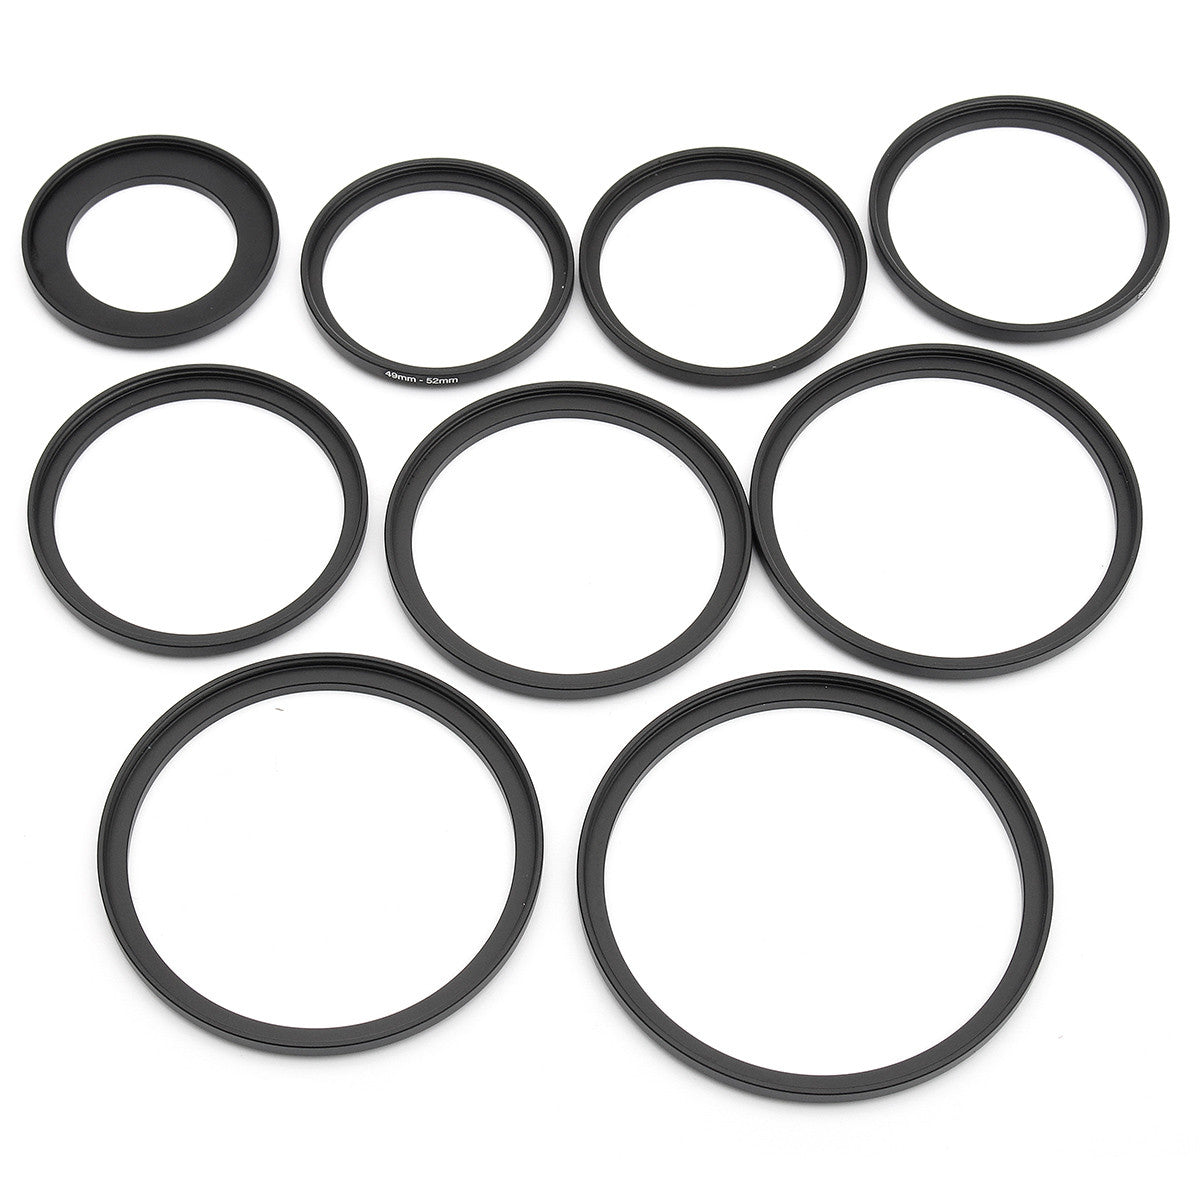 18pcs Step Up Down Lens Filter Ring Adapter Set 37 - 82mm For Canon Nikon